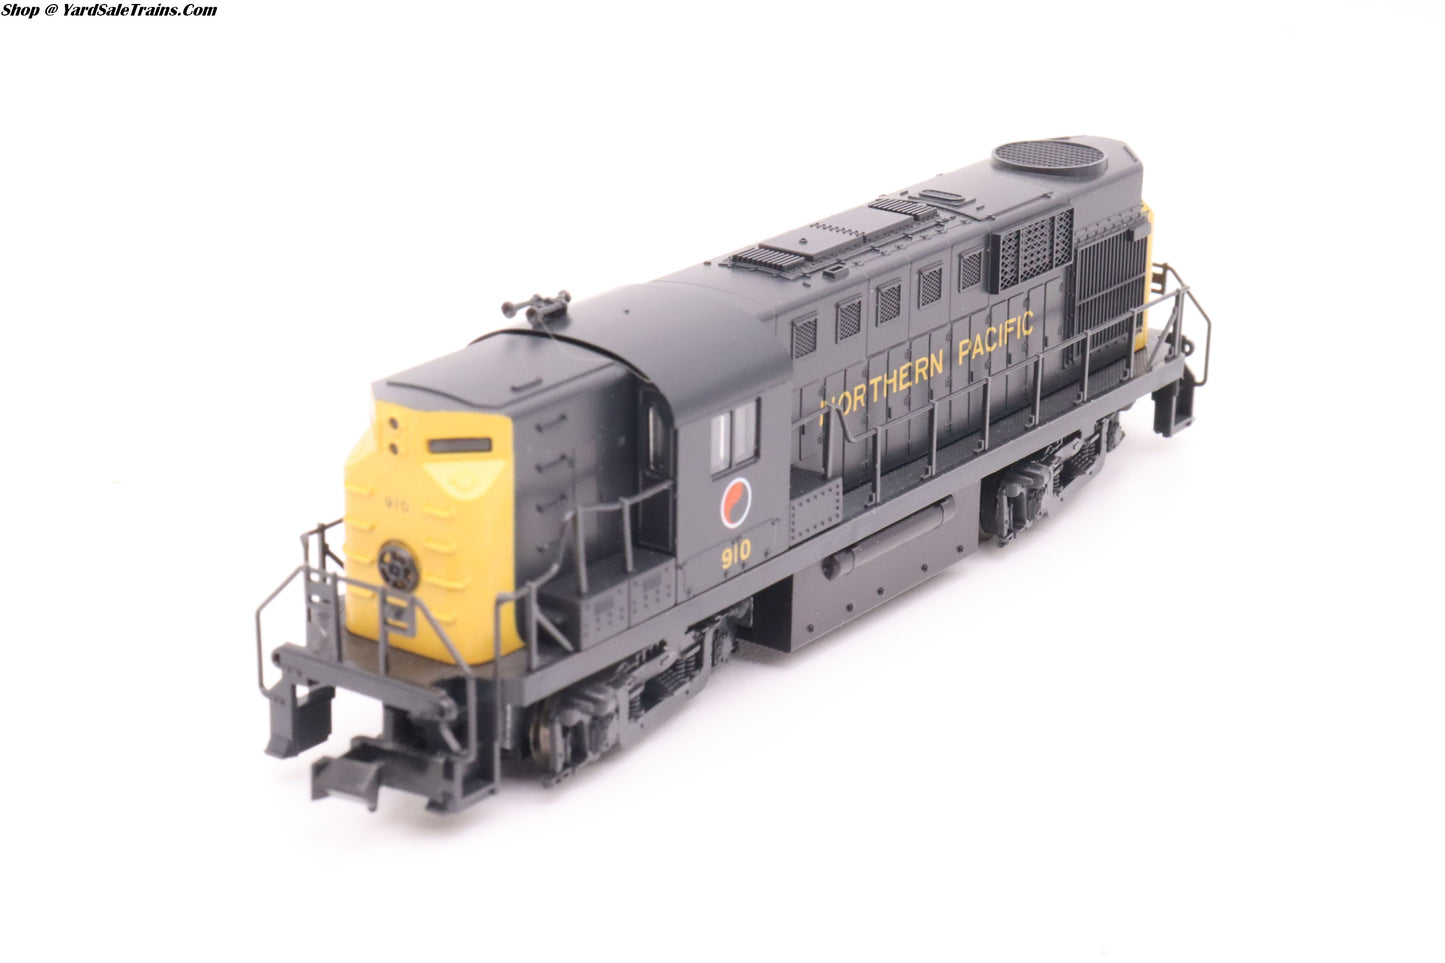 ATL-42605 - ALCO RS-11 Northern Pacific - NP #910 - Preowned